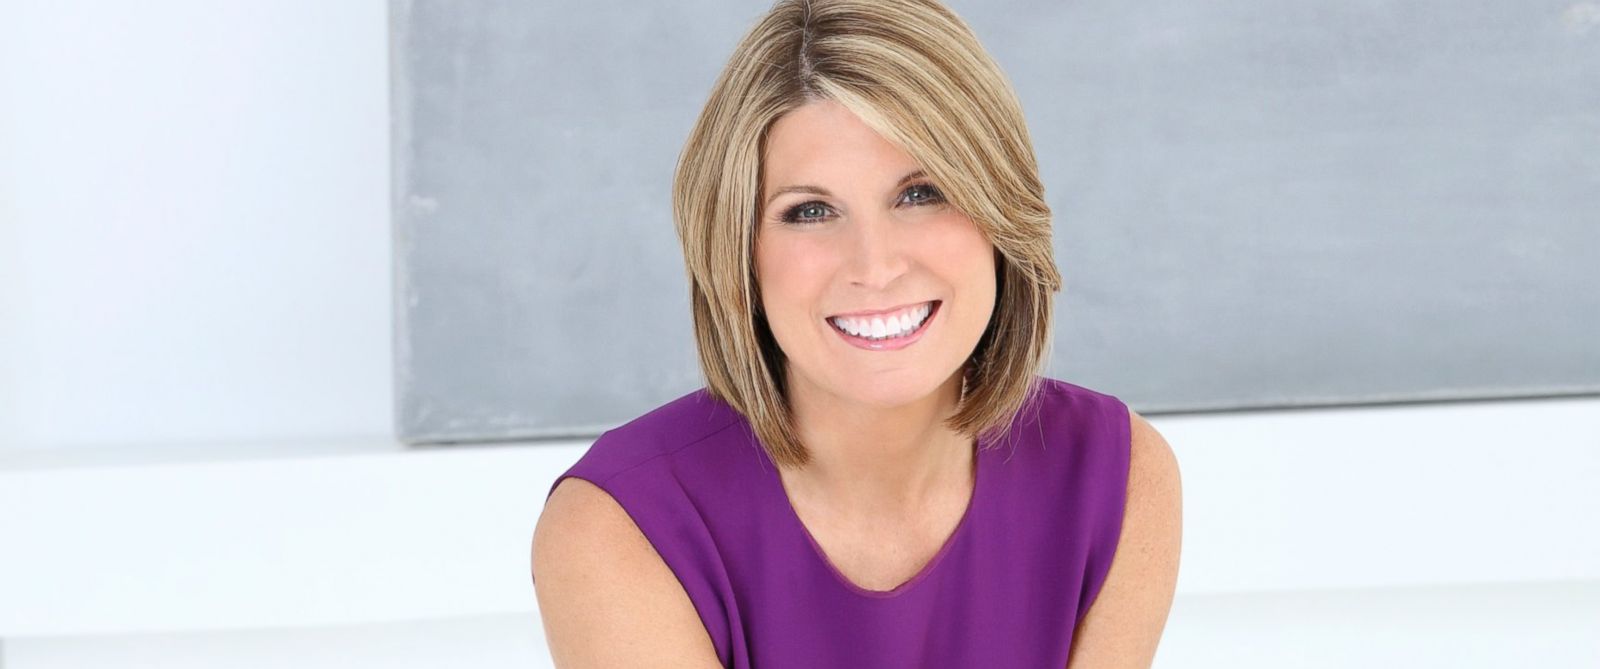 where does nicole wallace live